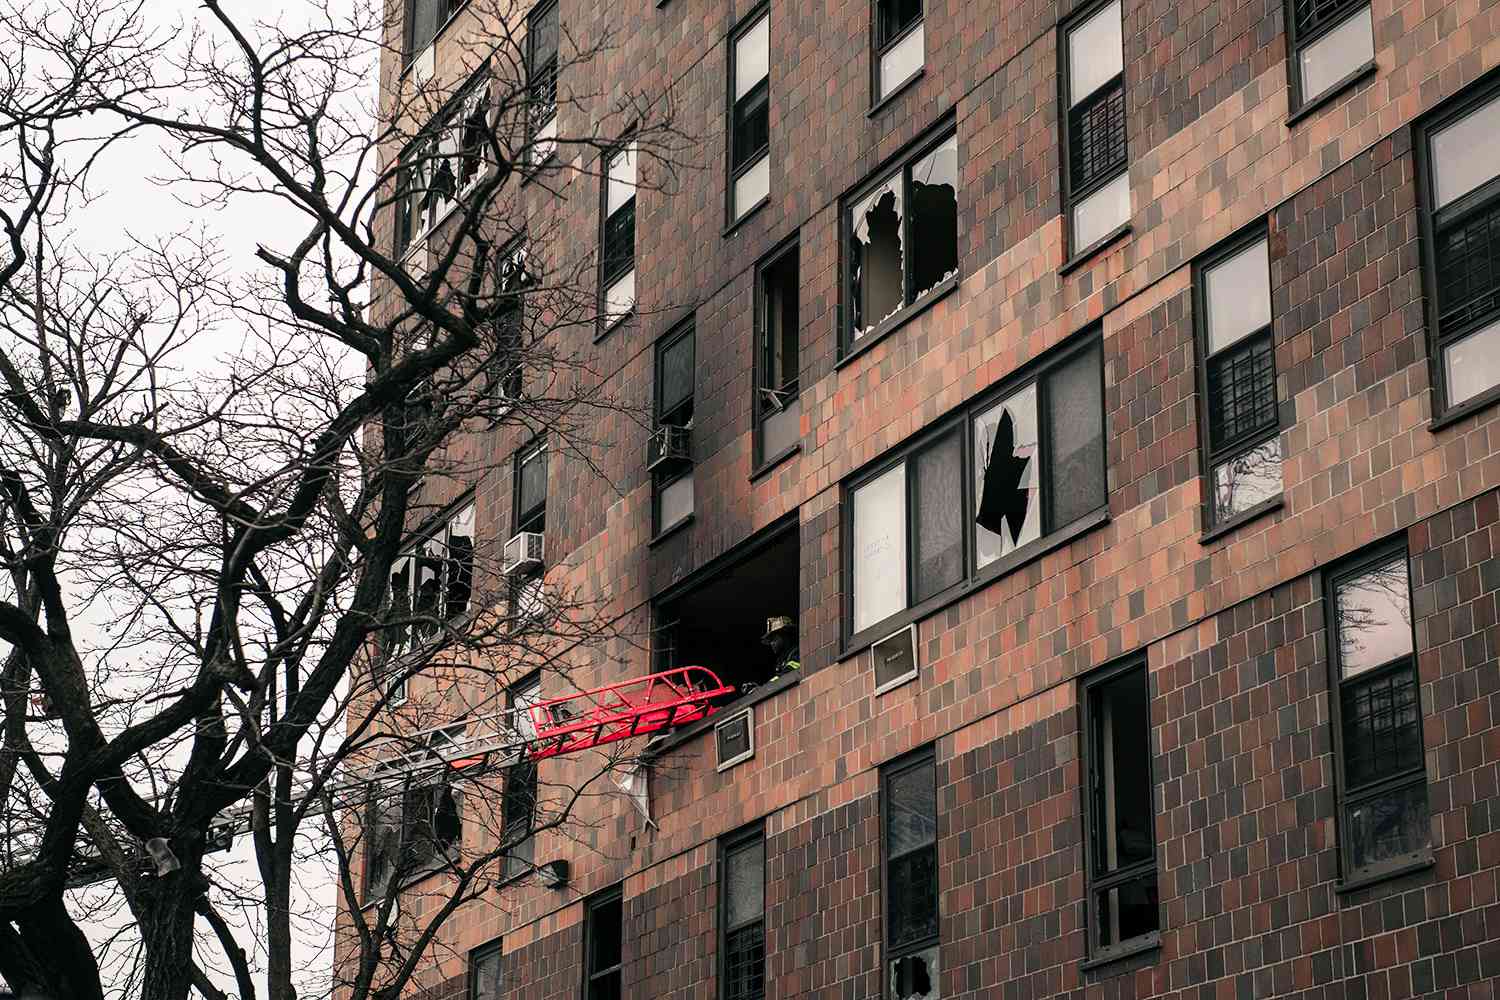 Broken windows and charred bricks mark the exterior of a 19-story residential building after a fire erupted in the morning on January 9, 2022 in the Bronx borough of New York City. Reports indicate over 50 people were injured.